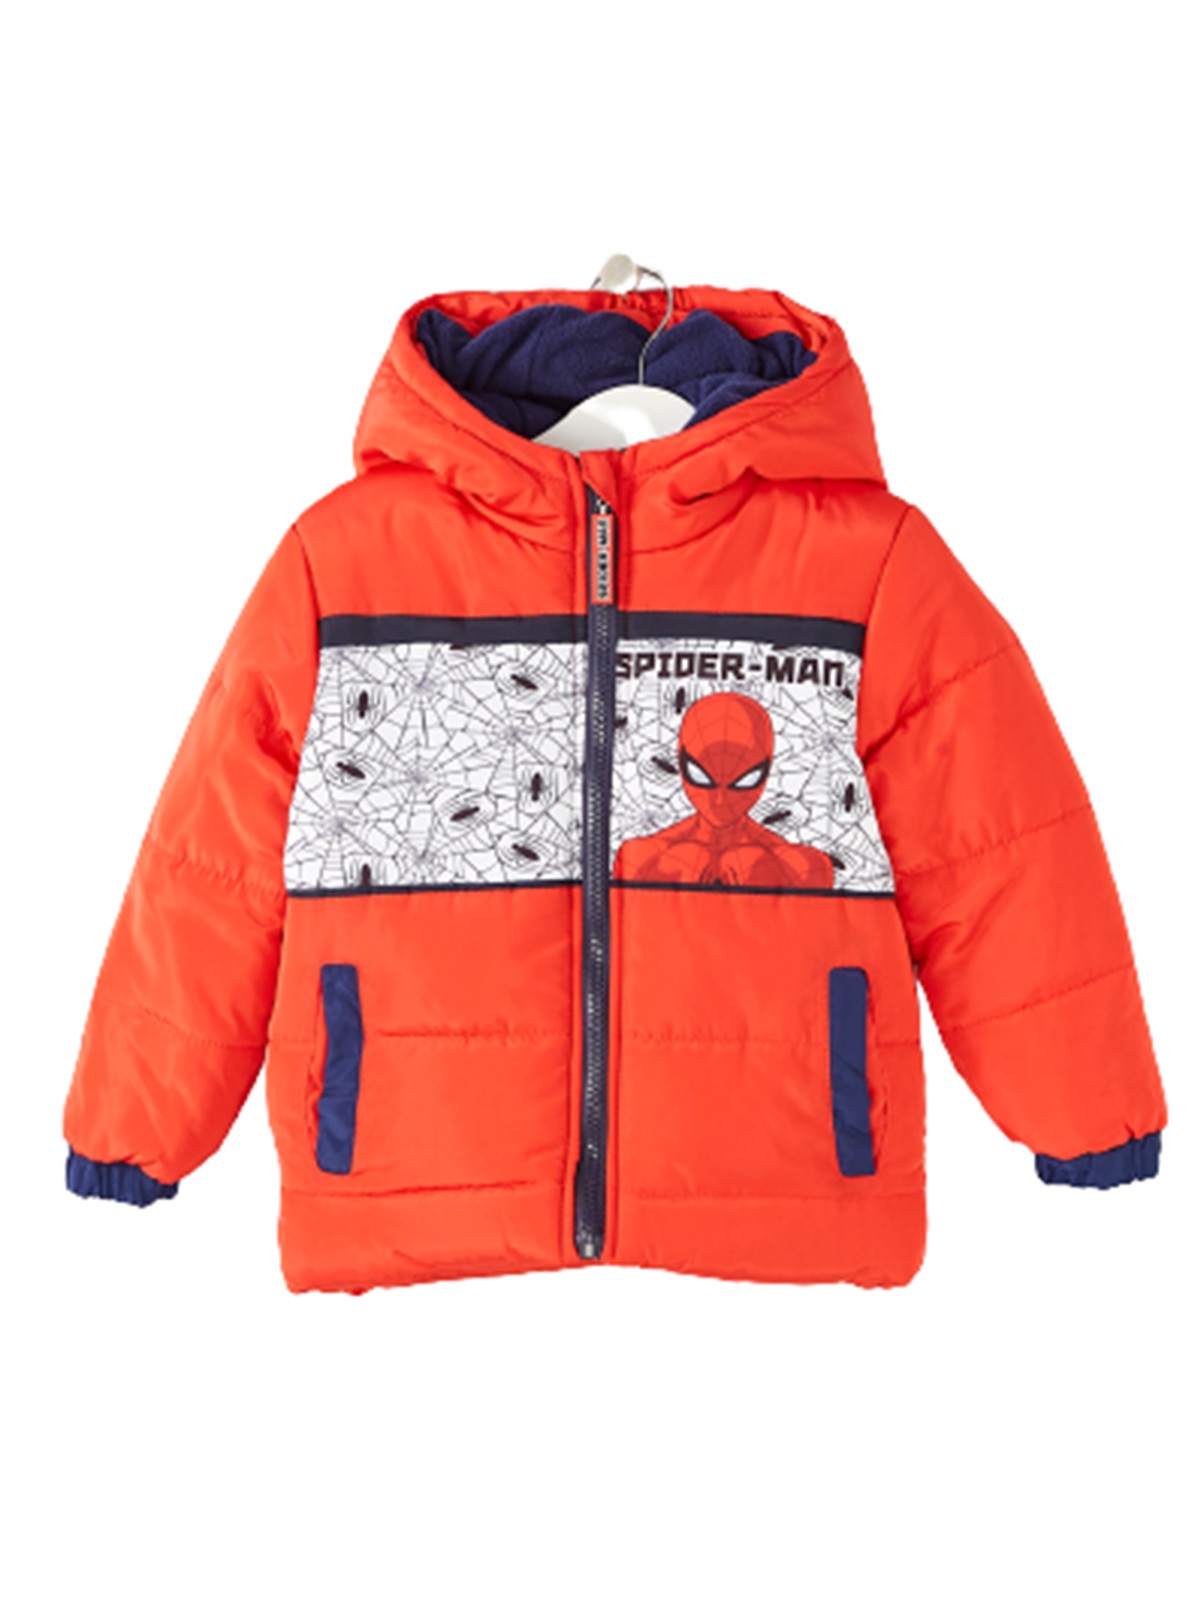 Spiderman Parka with a hood